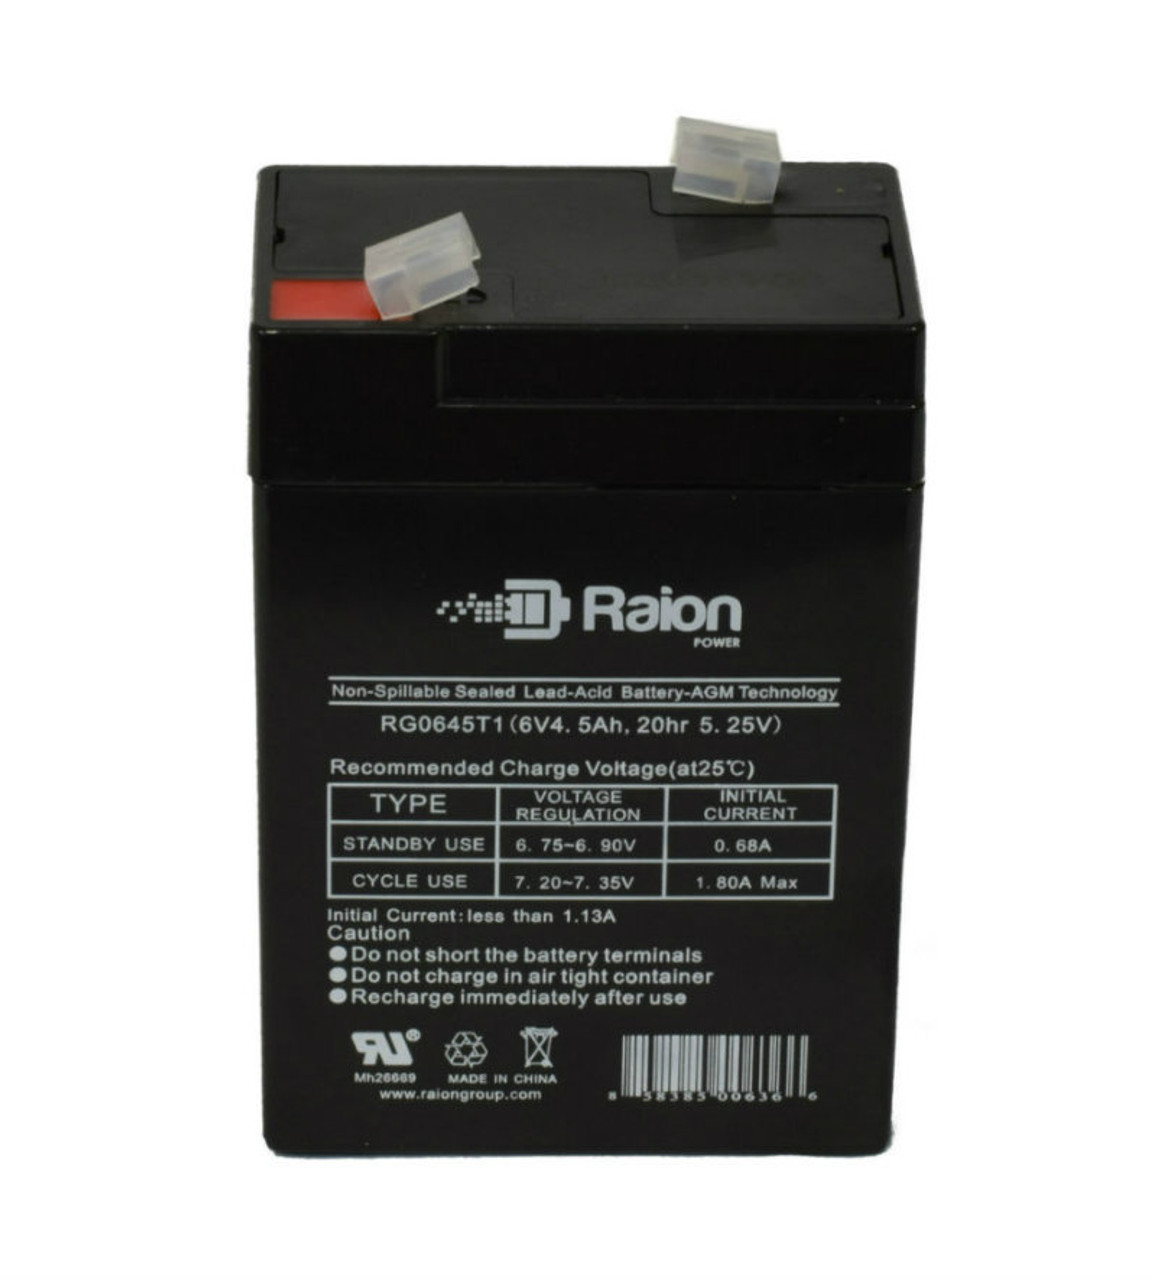 Raion Power RG0645T1 Replacement Battery Cartridge for Honeywell K9392